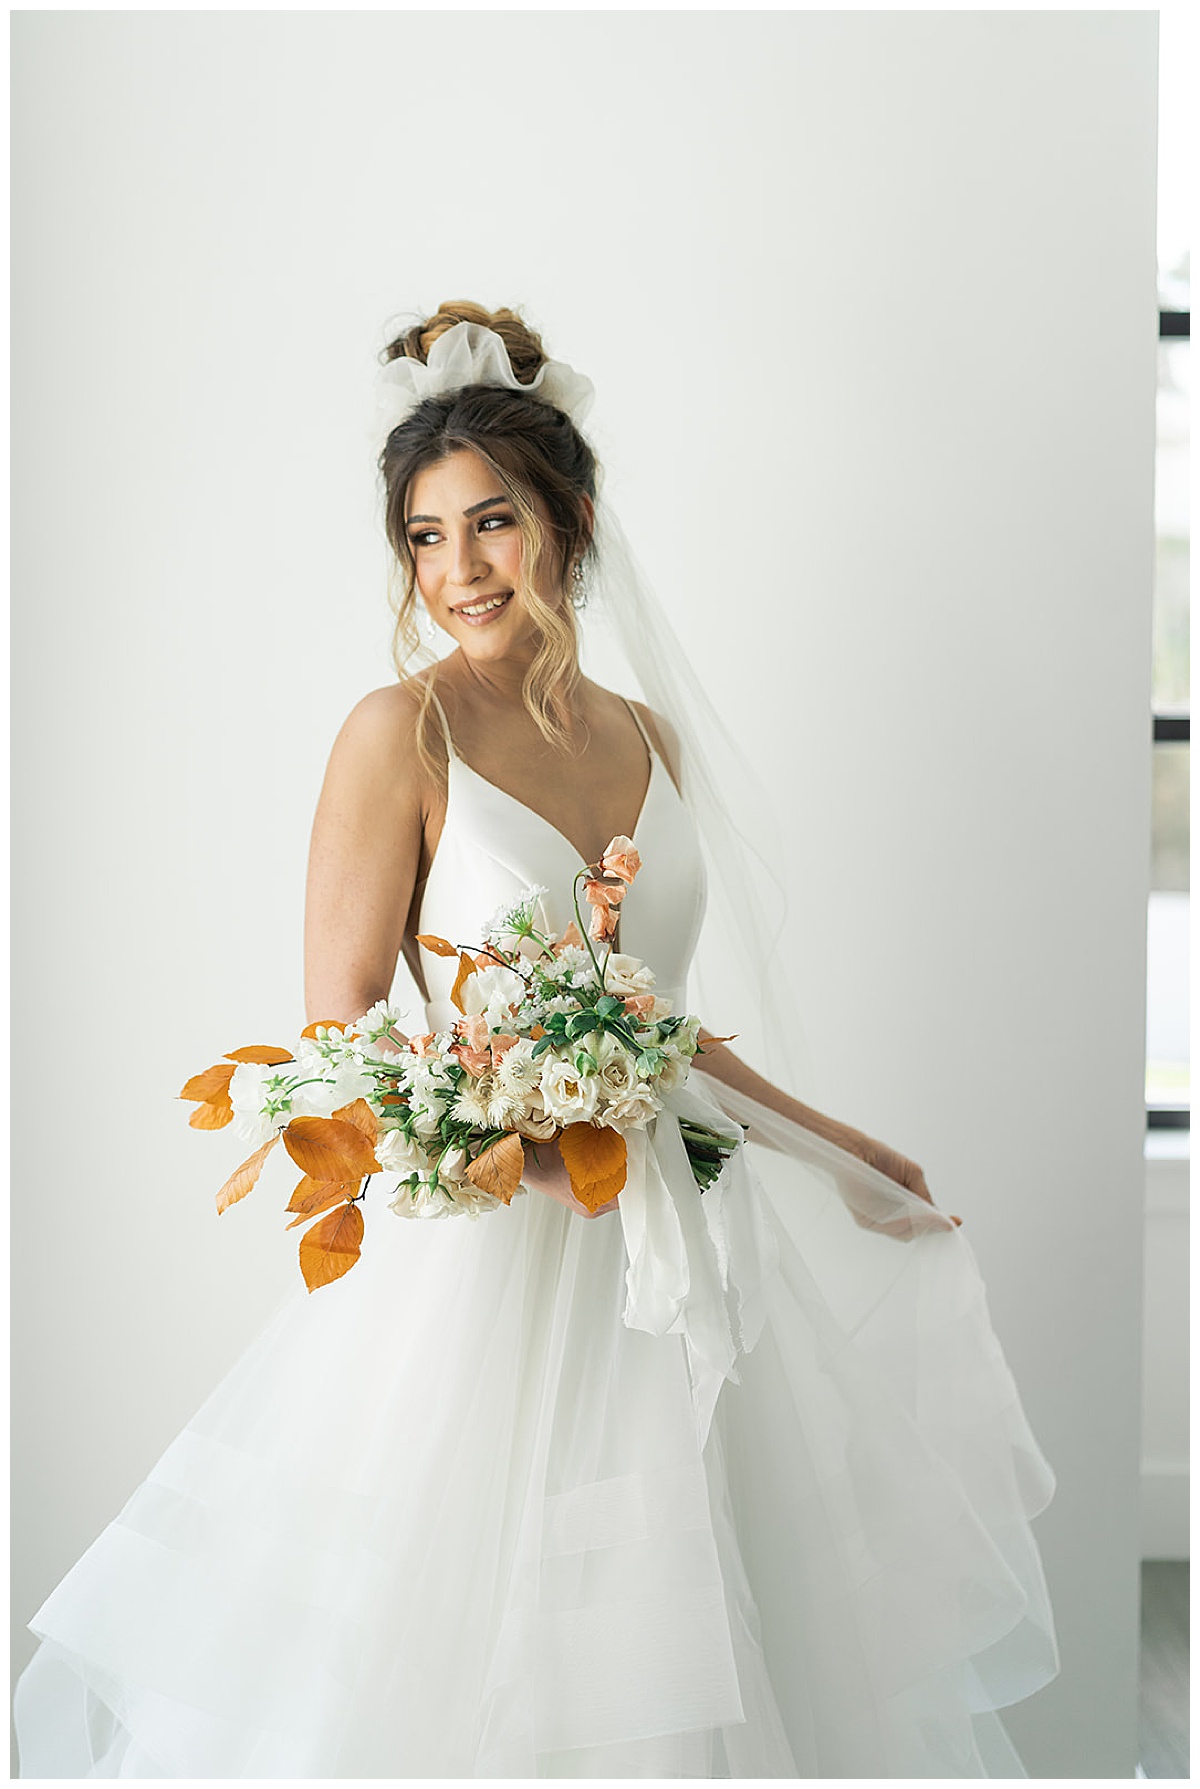 Stunning white bridal gown and bouquet for Houston’s Best Wedding Photographers 